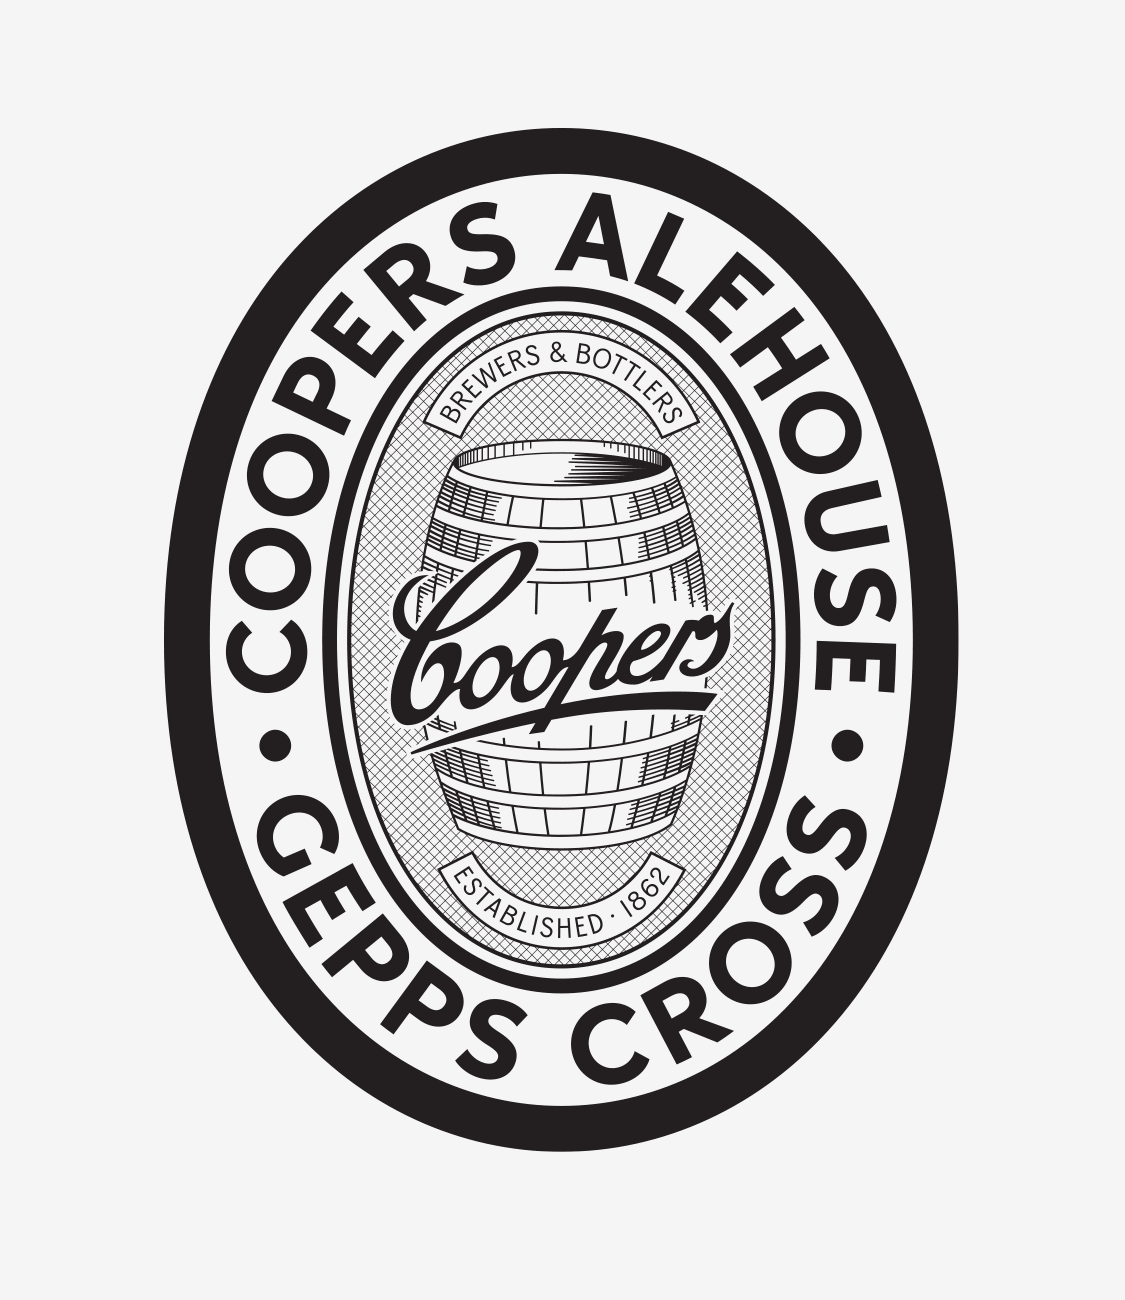 coopers logo